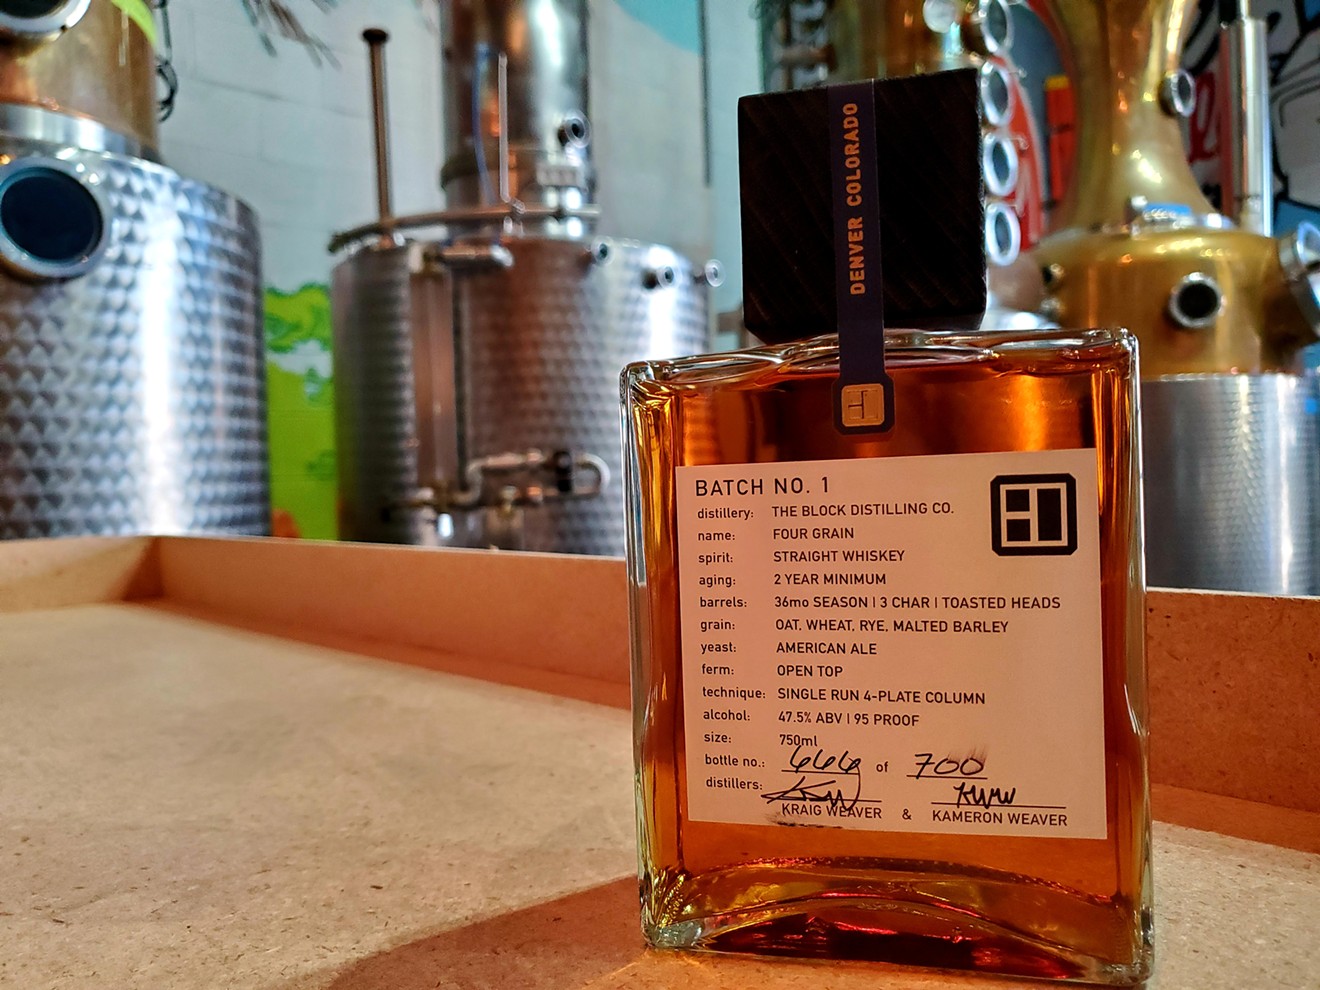 The Four Grain Straight Whiskey at Block Distilling, released December 15, 2019.